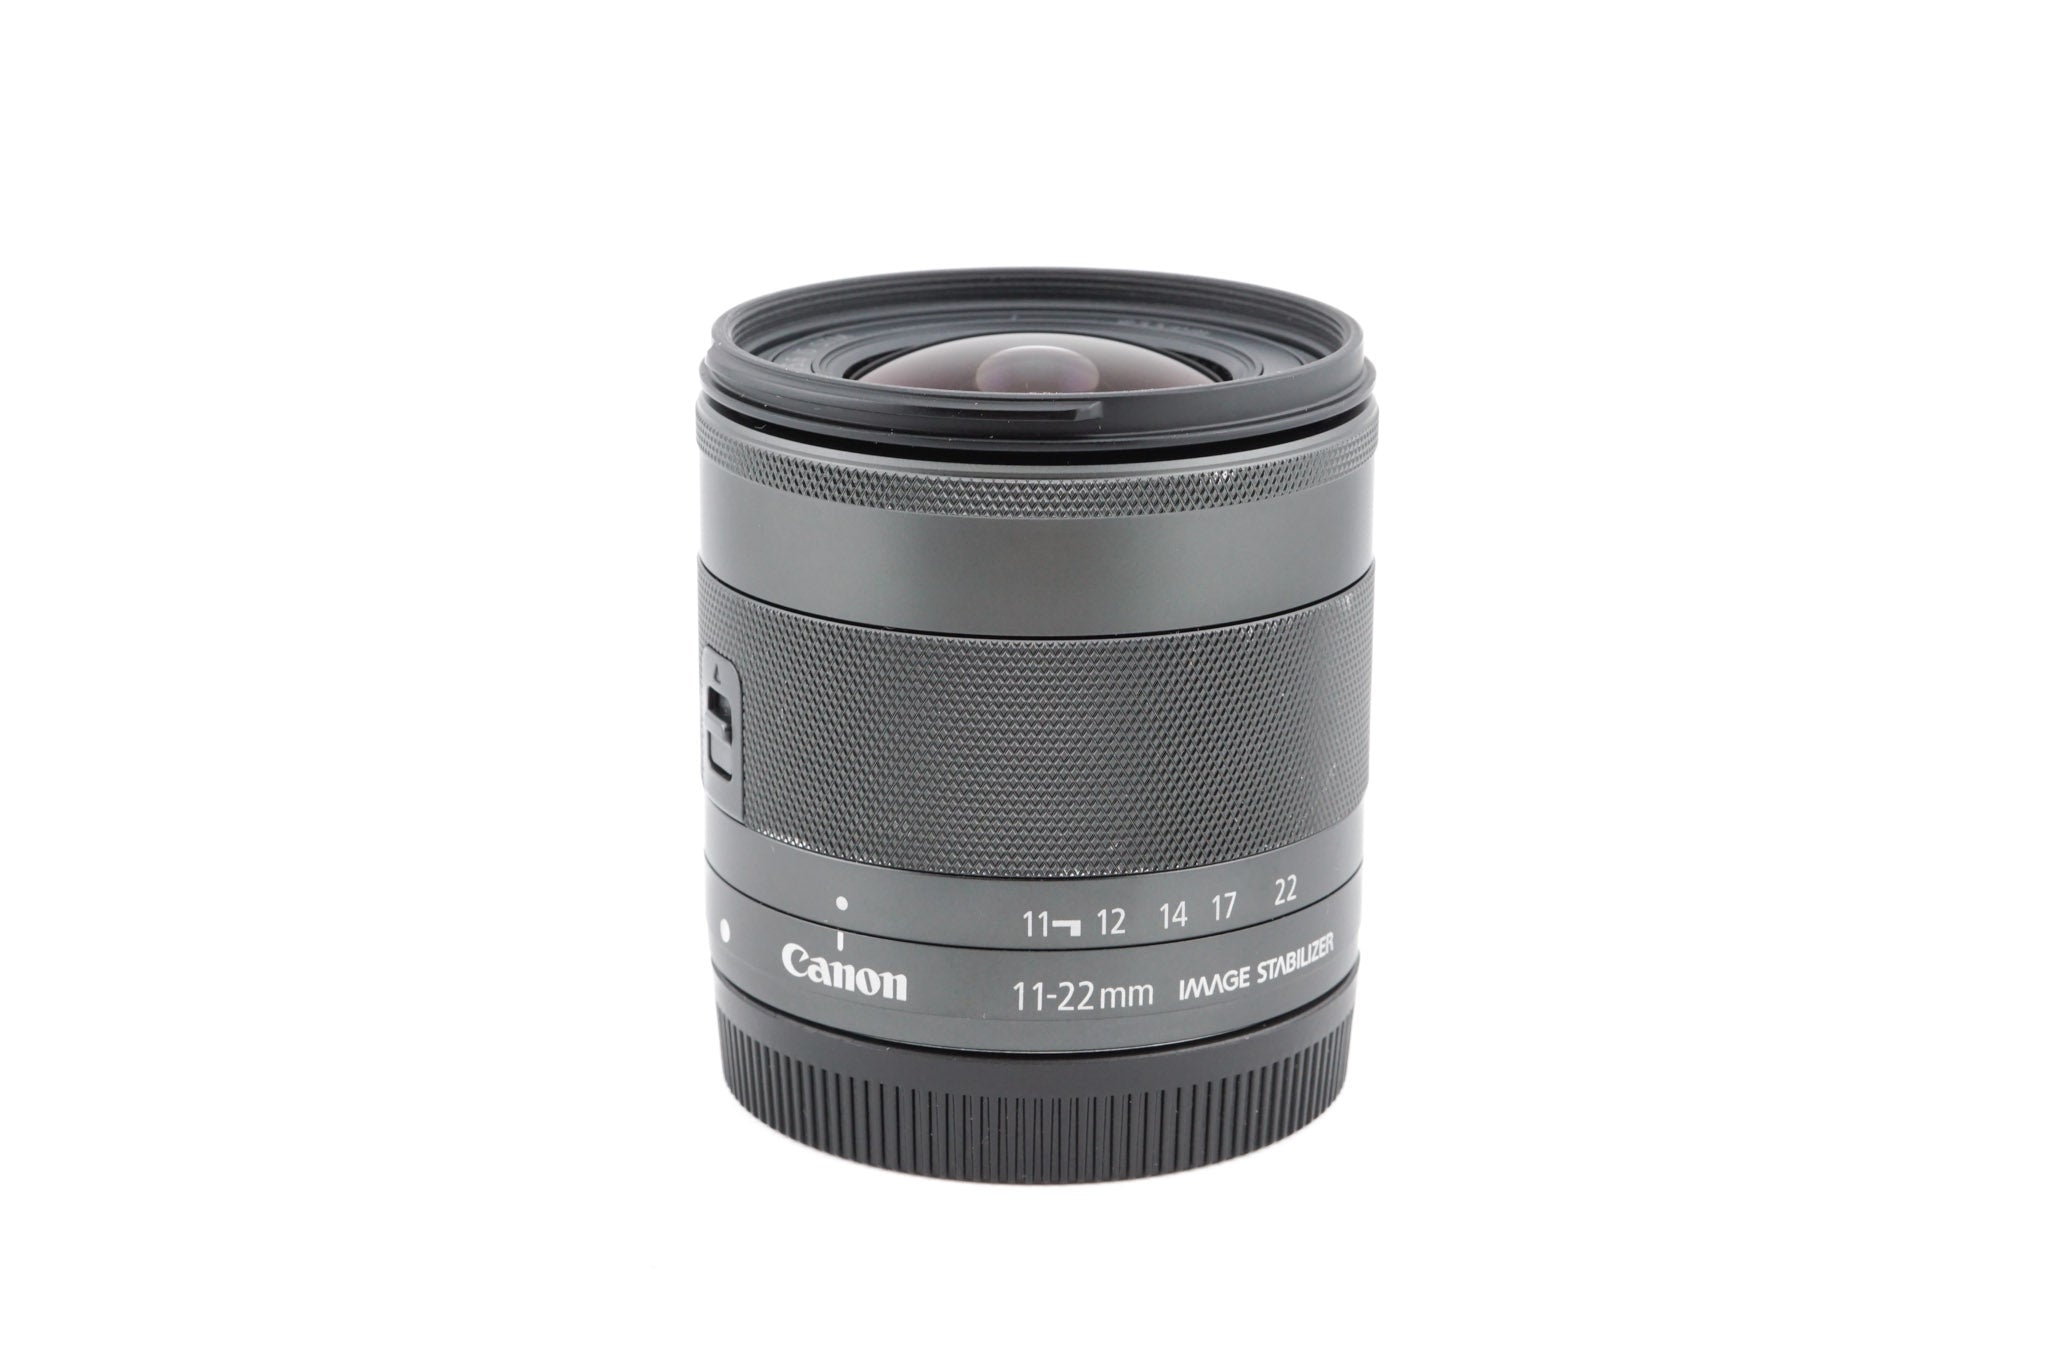 Canon 11-22mm f4-5.6 IS STM - Lens